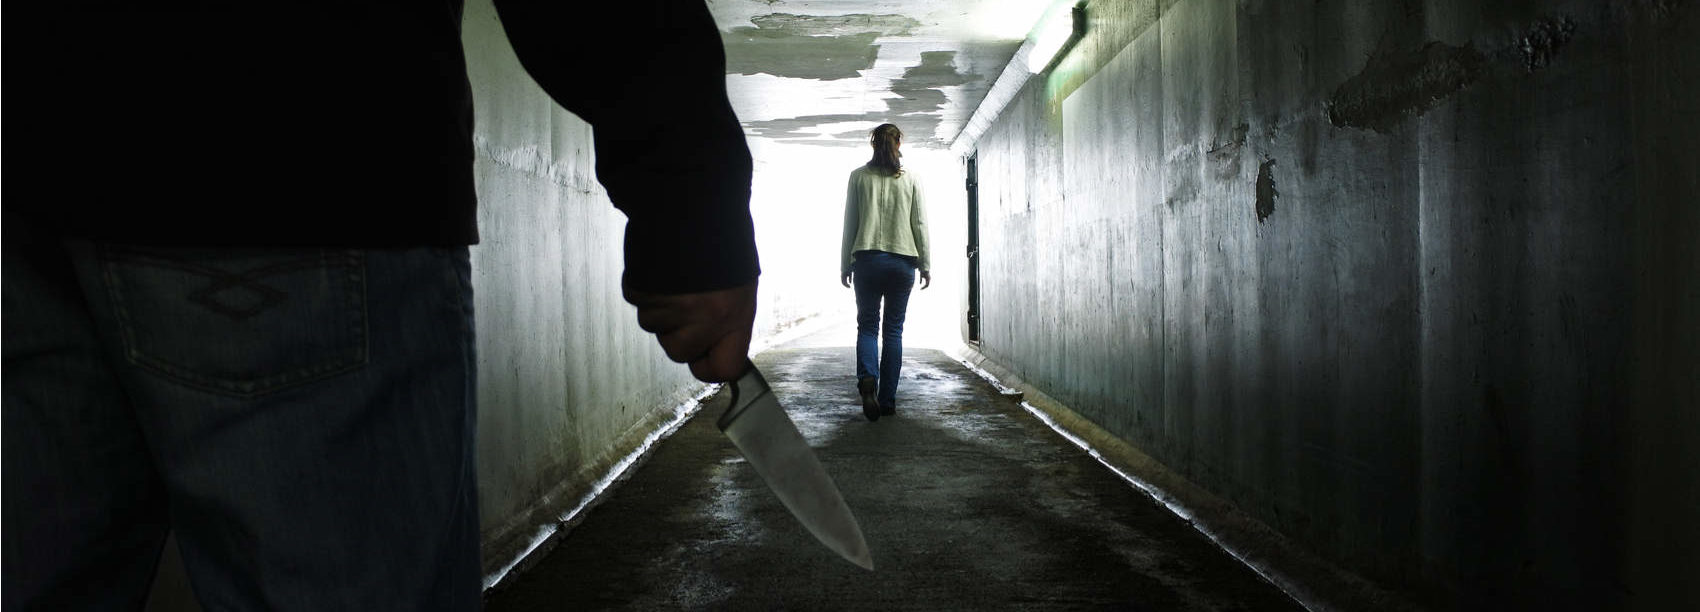 Knife crime prevention orders introduced